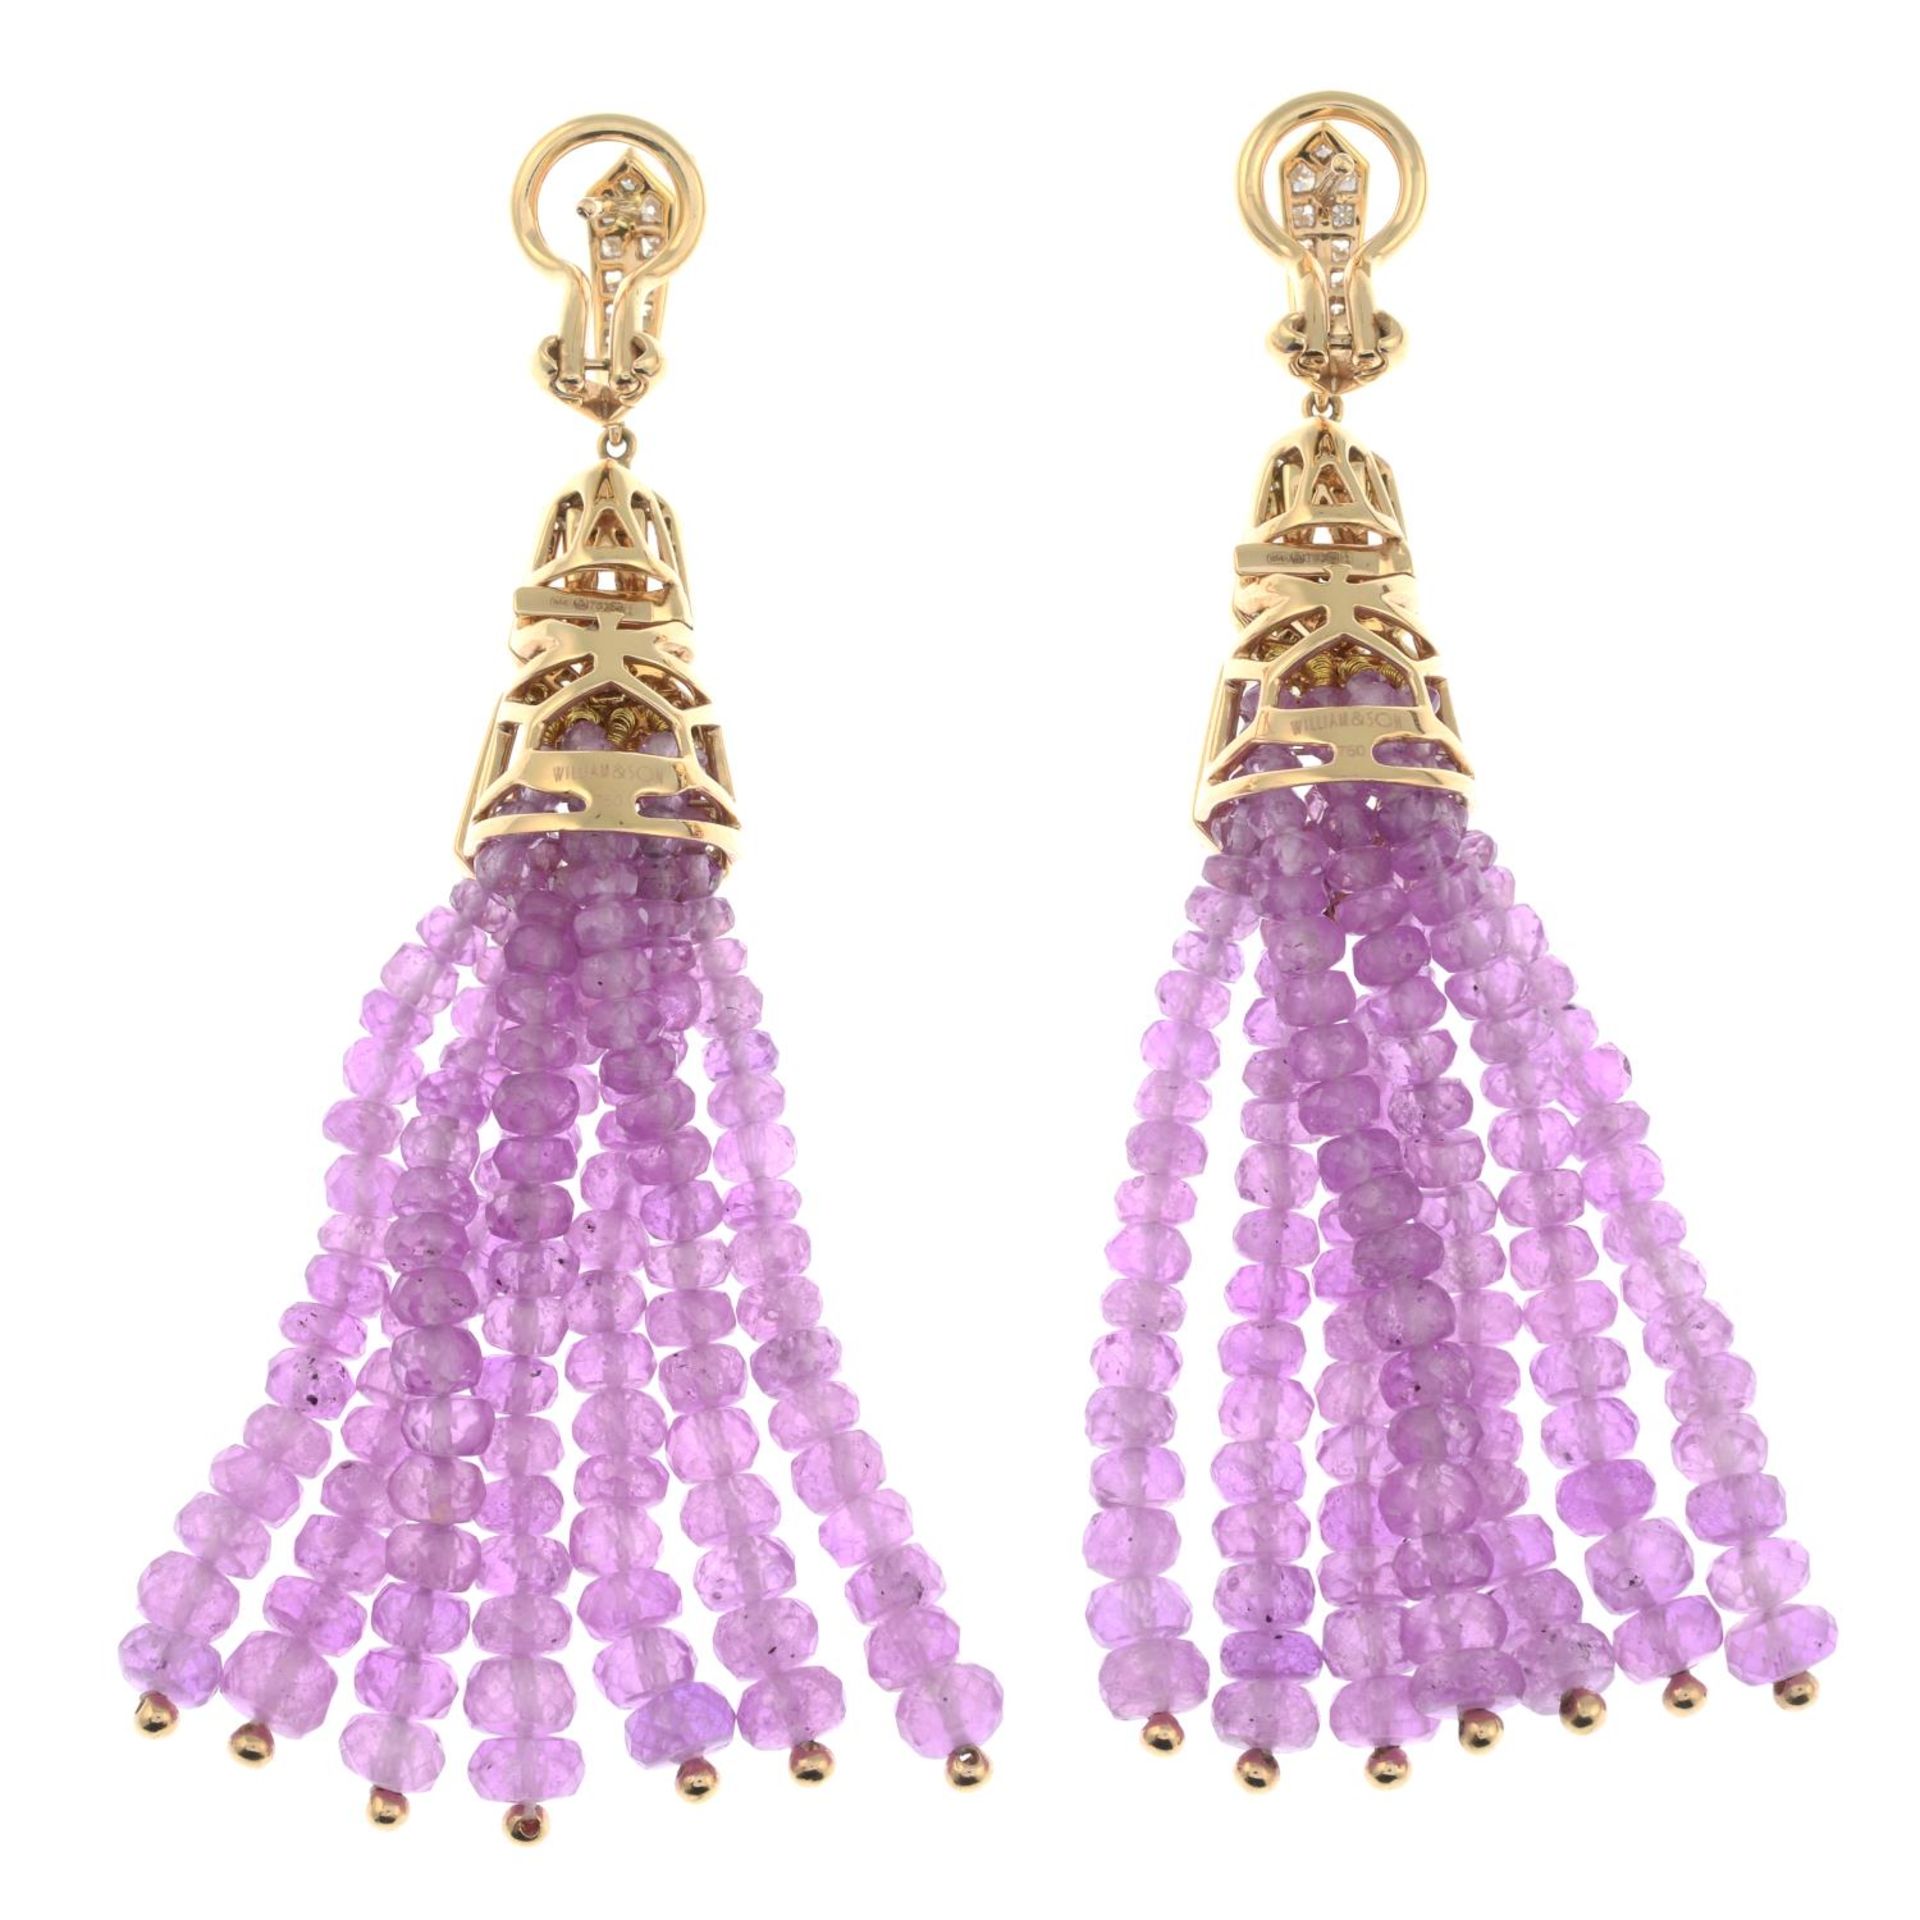 A pair of 18ct gold diamond 'The London Collection' earrings, - Image 5 of 6